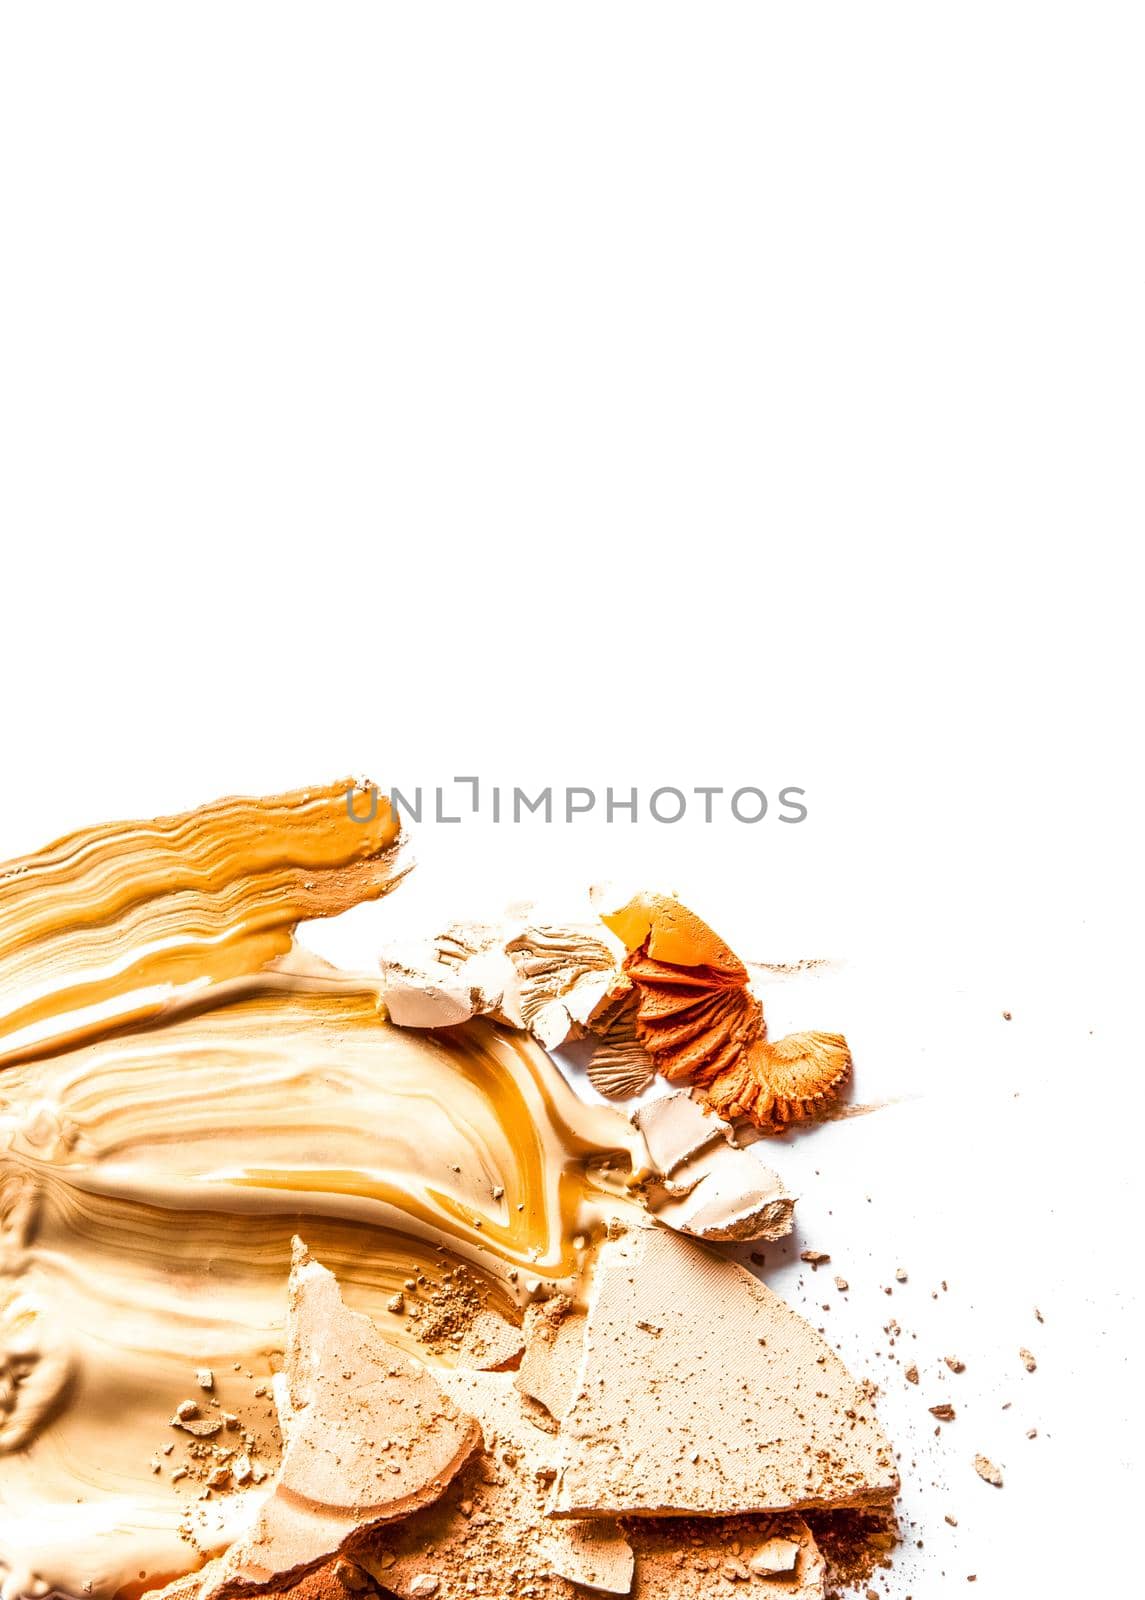 Crushed eyeshadow, powder and liquid foundation close-up isolated on white background by Anneleven